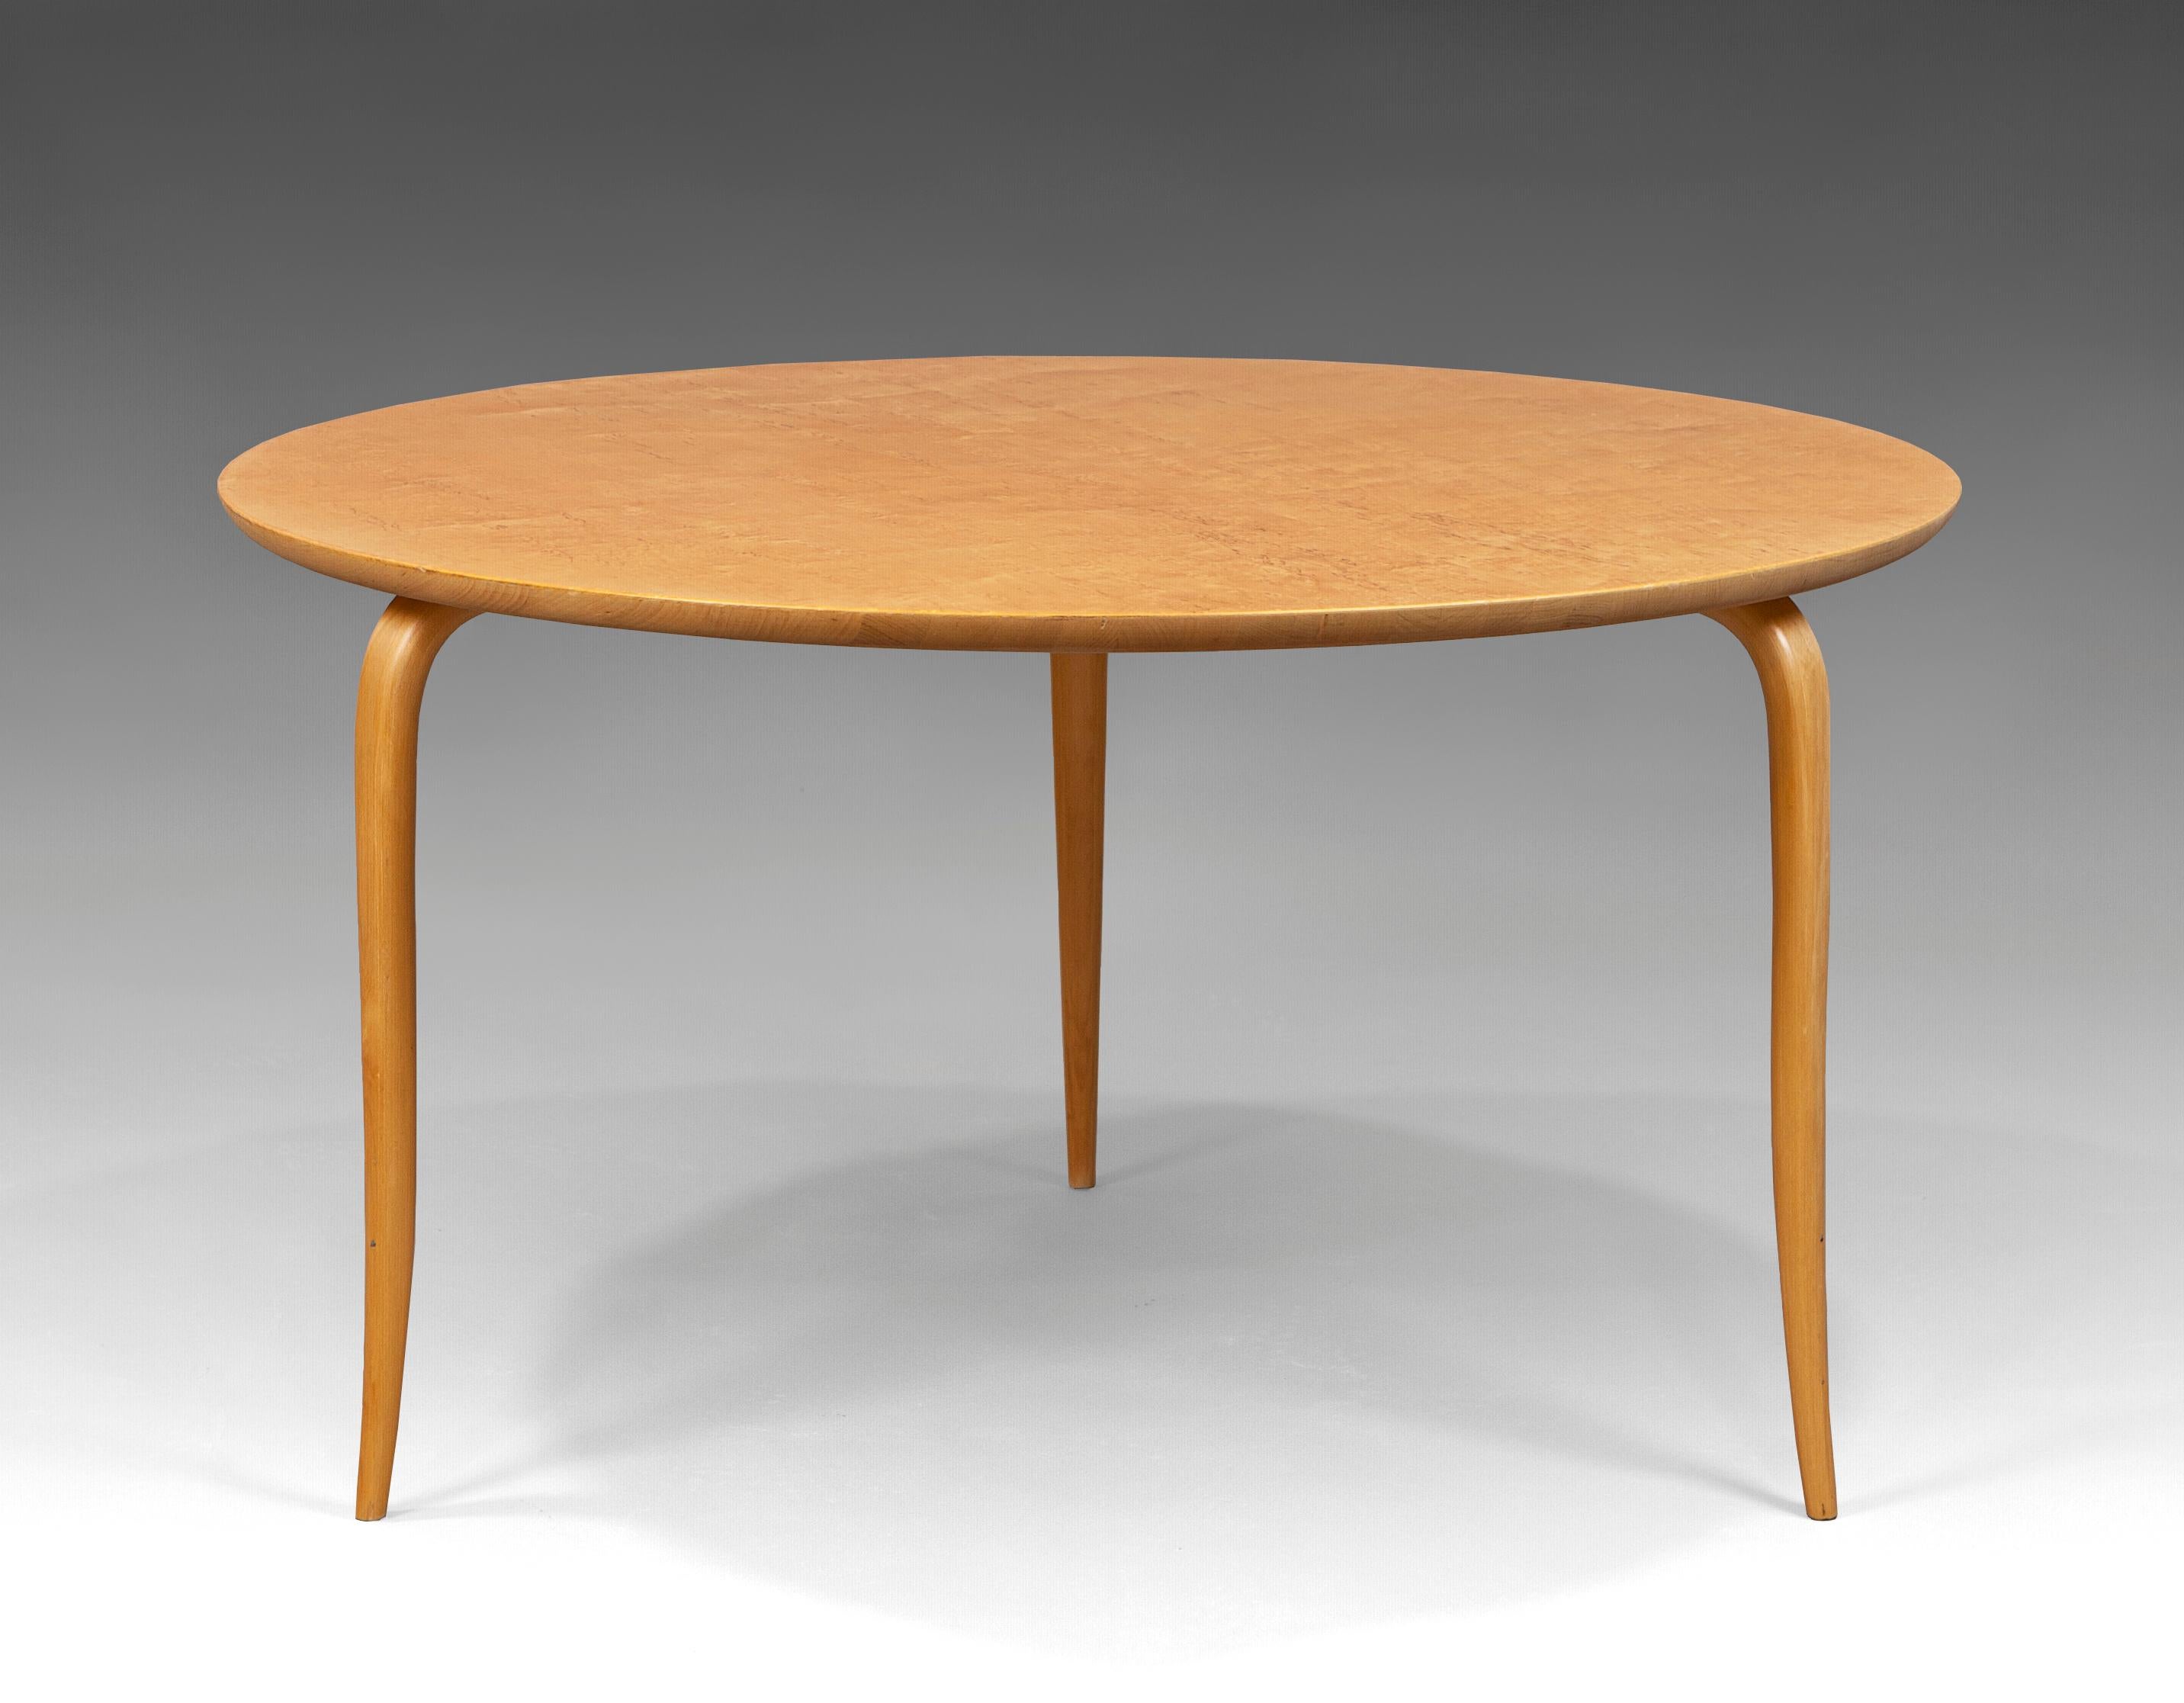 Annika Table by Bruno Mathsson for Karl Mathsson, Sweden, Late 60’s (dated 1969)
Legs in birch and karelian birch top.
 